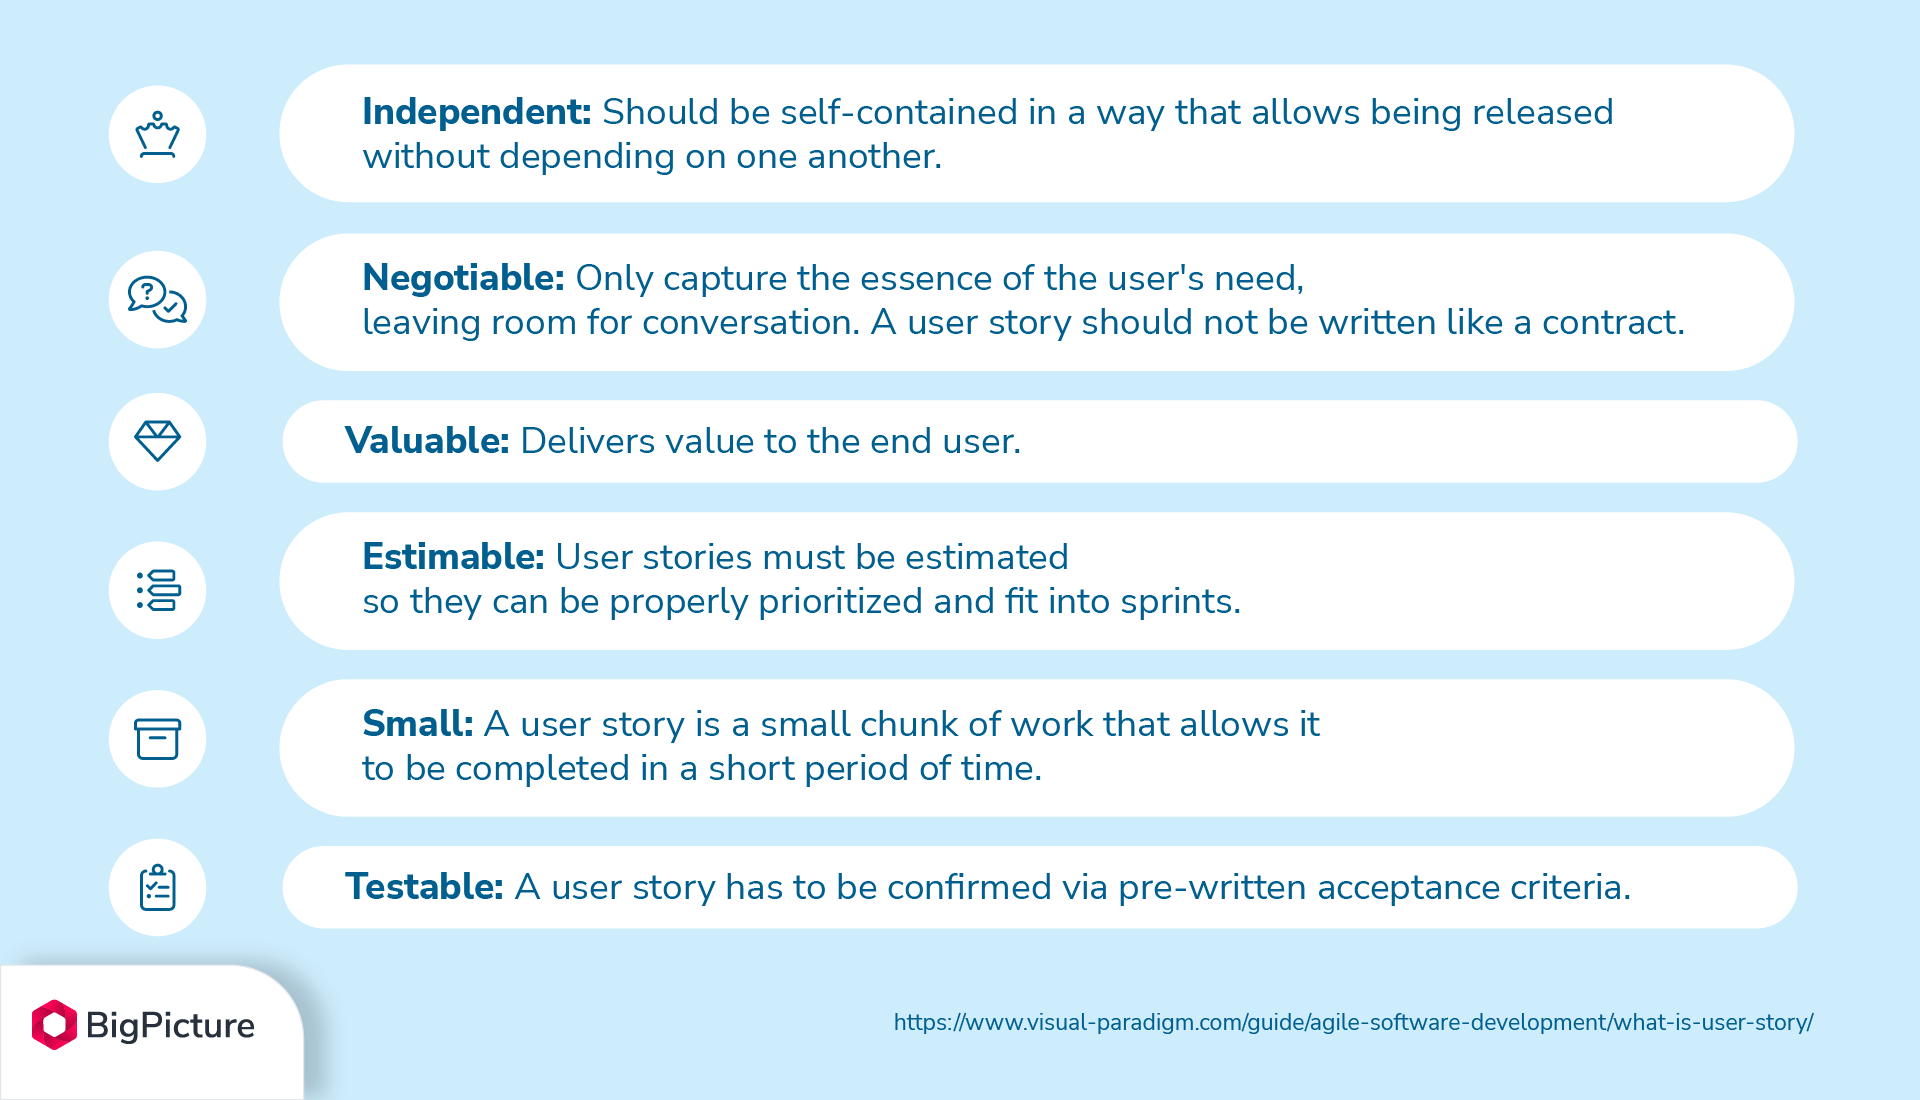 The main features of user stories: independent, negotiable, valuable, estimable, small, testable